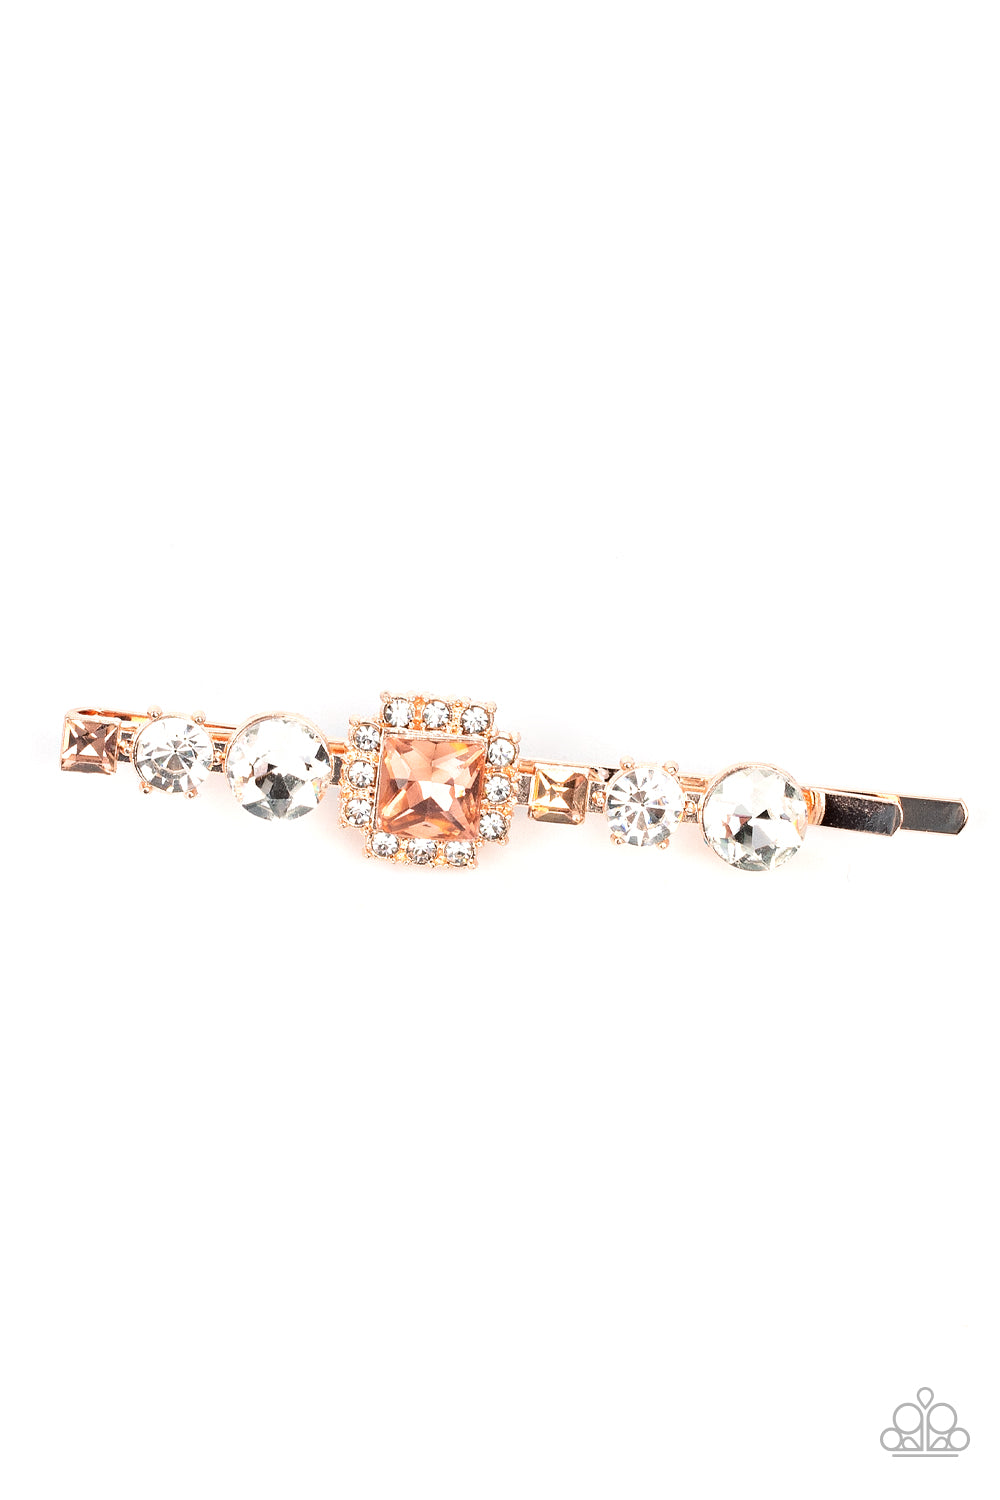 PRE-ORDERED - Couture Crasher - Gold - Paparazzi Hair Clip